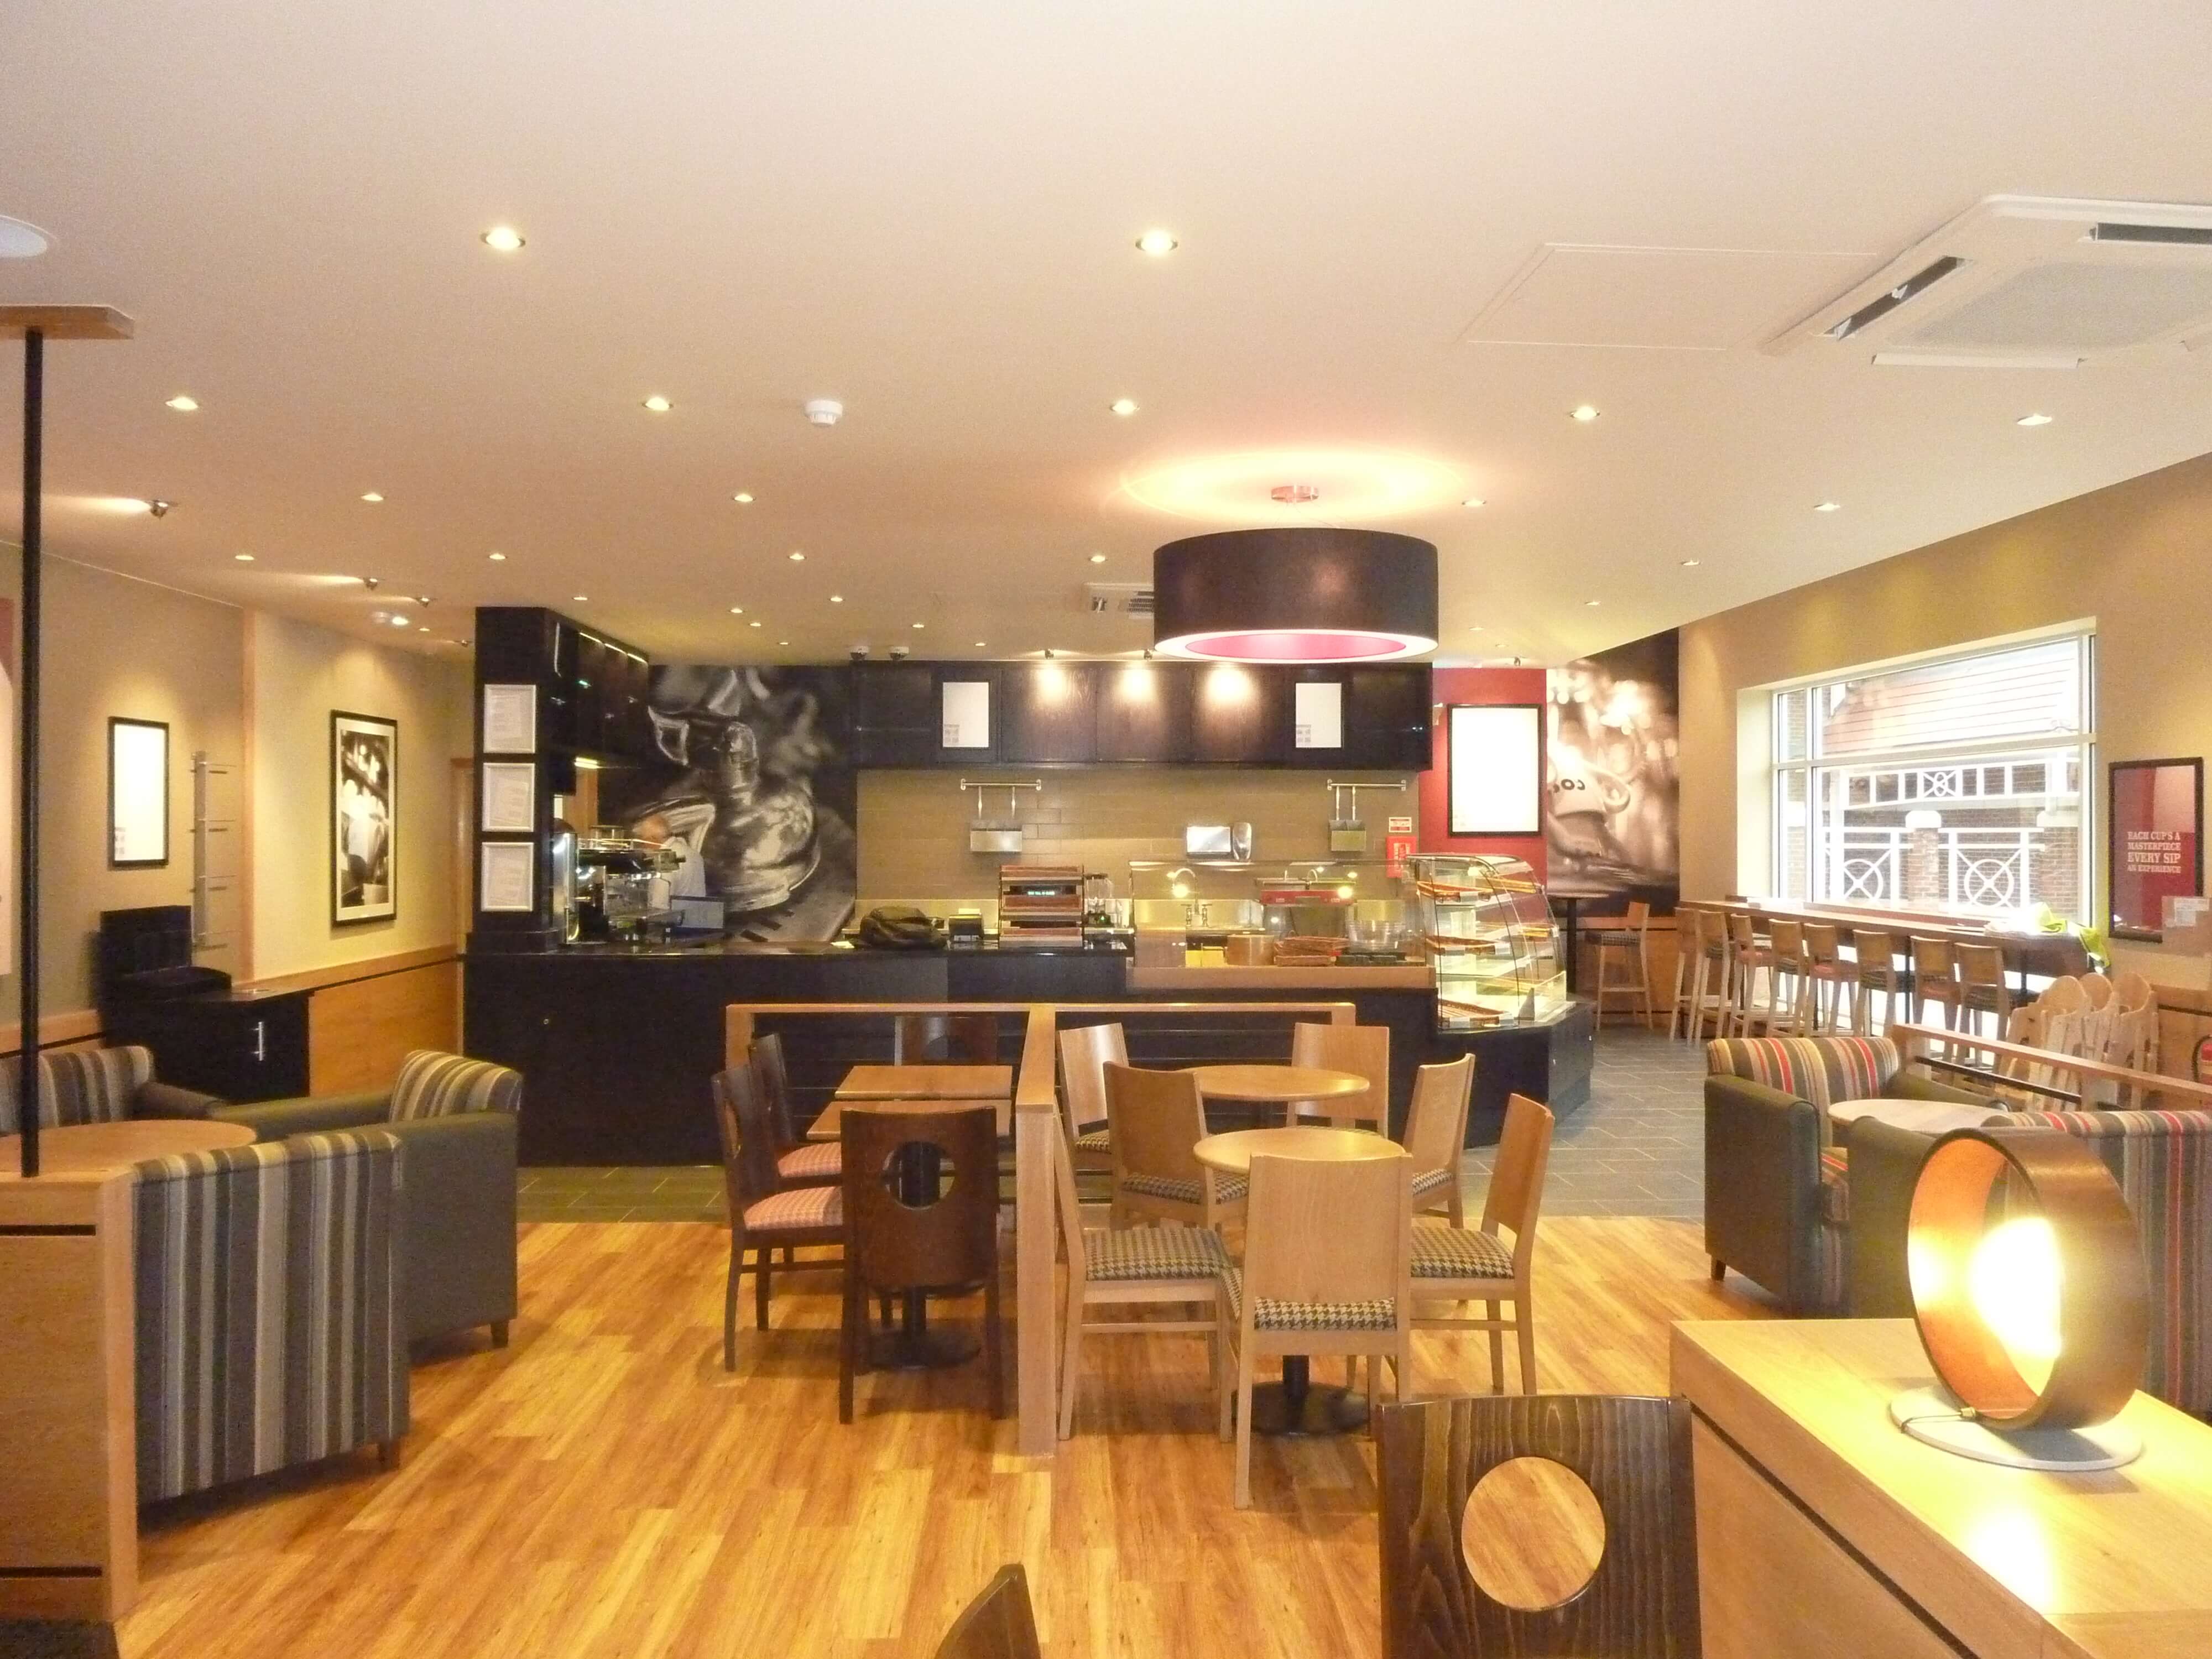 Modern Cafe Interior Design Concepts Check it Out Here